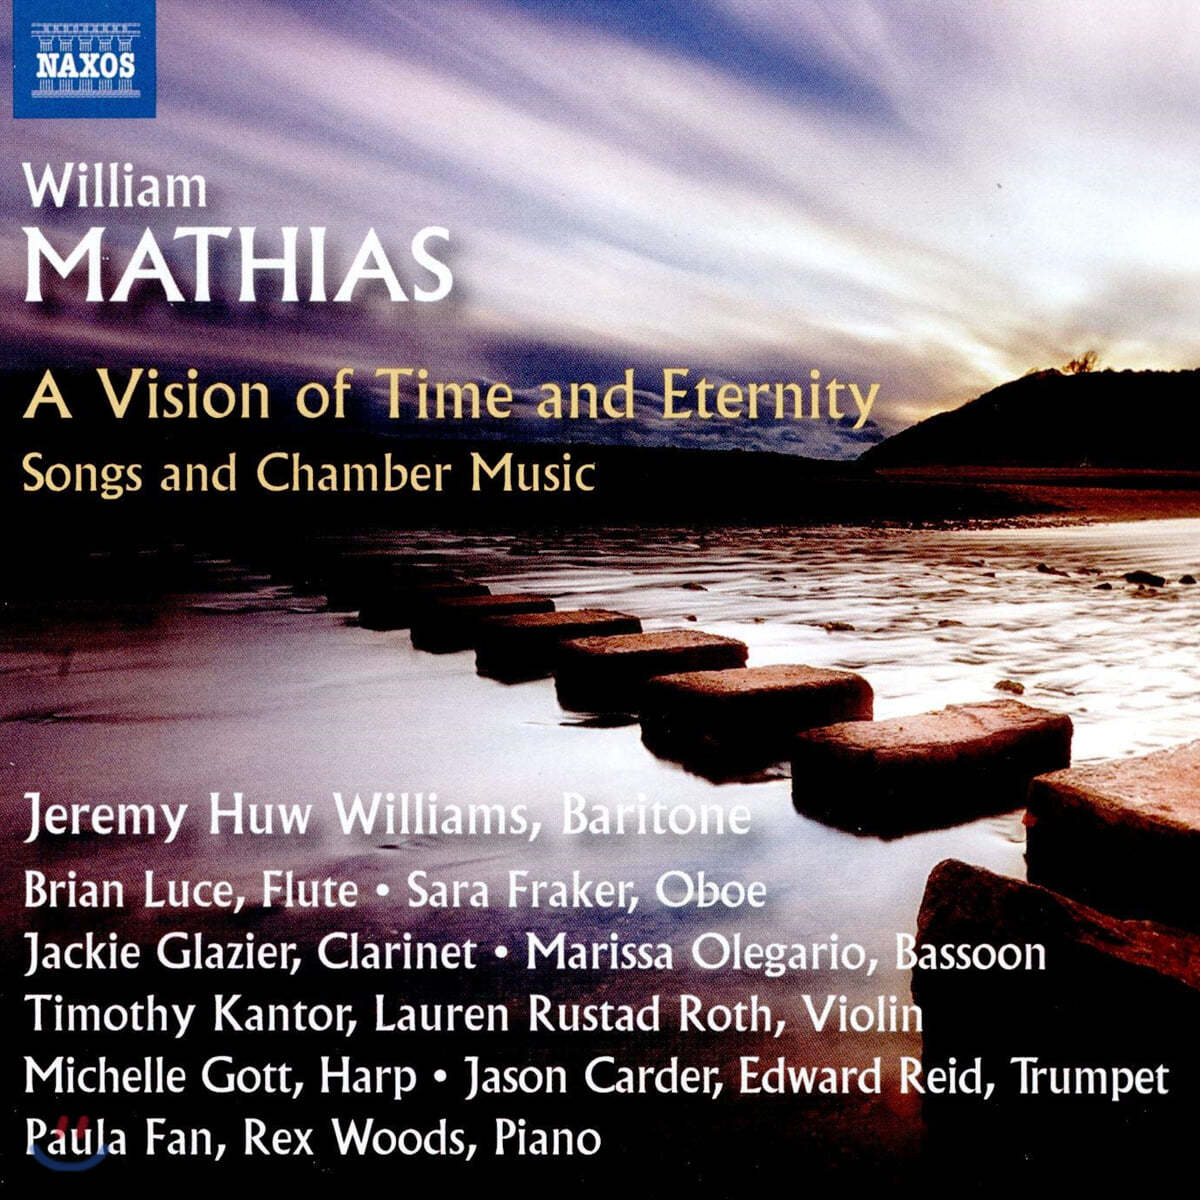 Jeremy Huw Williams 윌리엄 마티아스: 가곡과 실내악 작품집 (William Mathias: A Vision of Time and Eternity - Songs and Chamber Music)